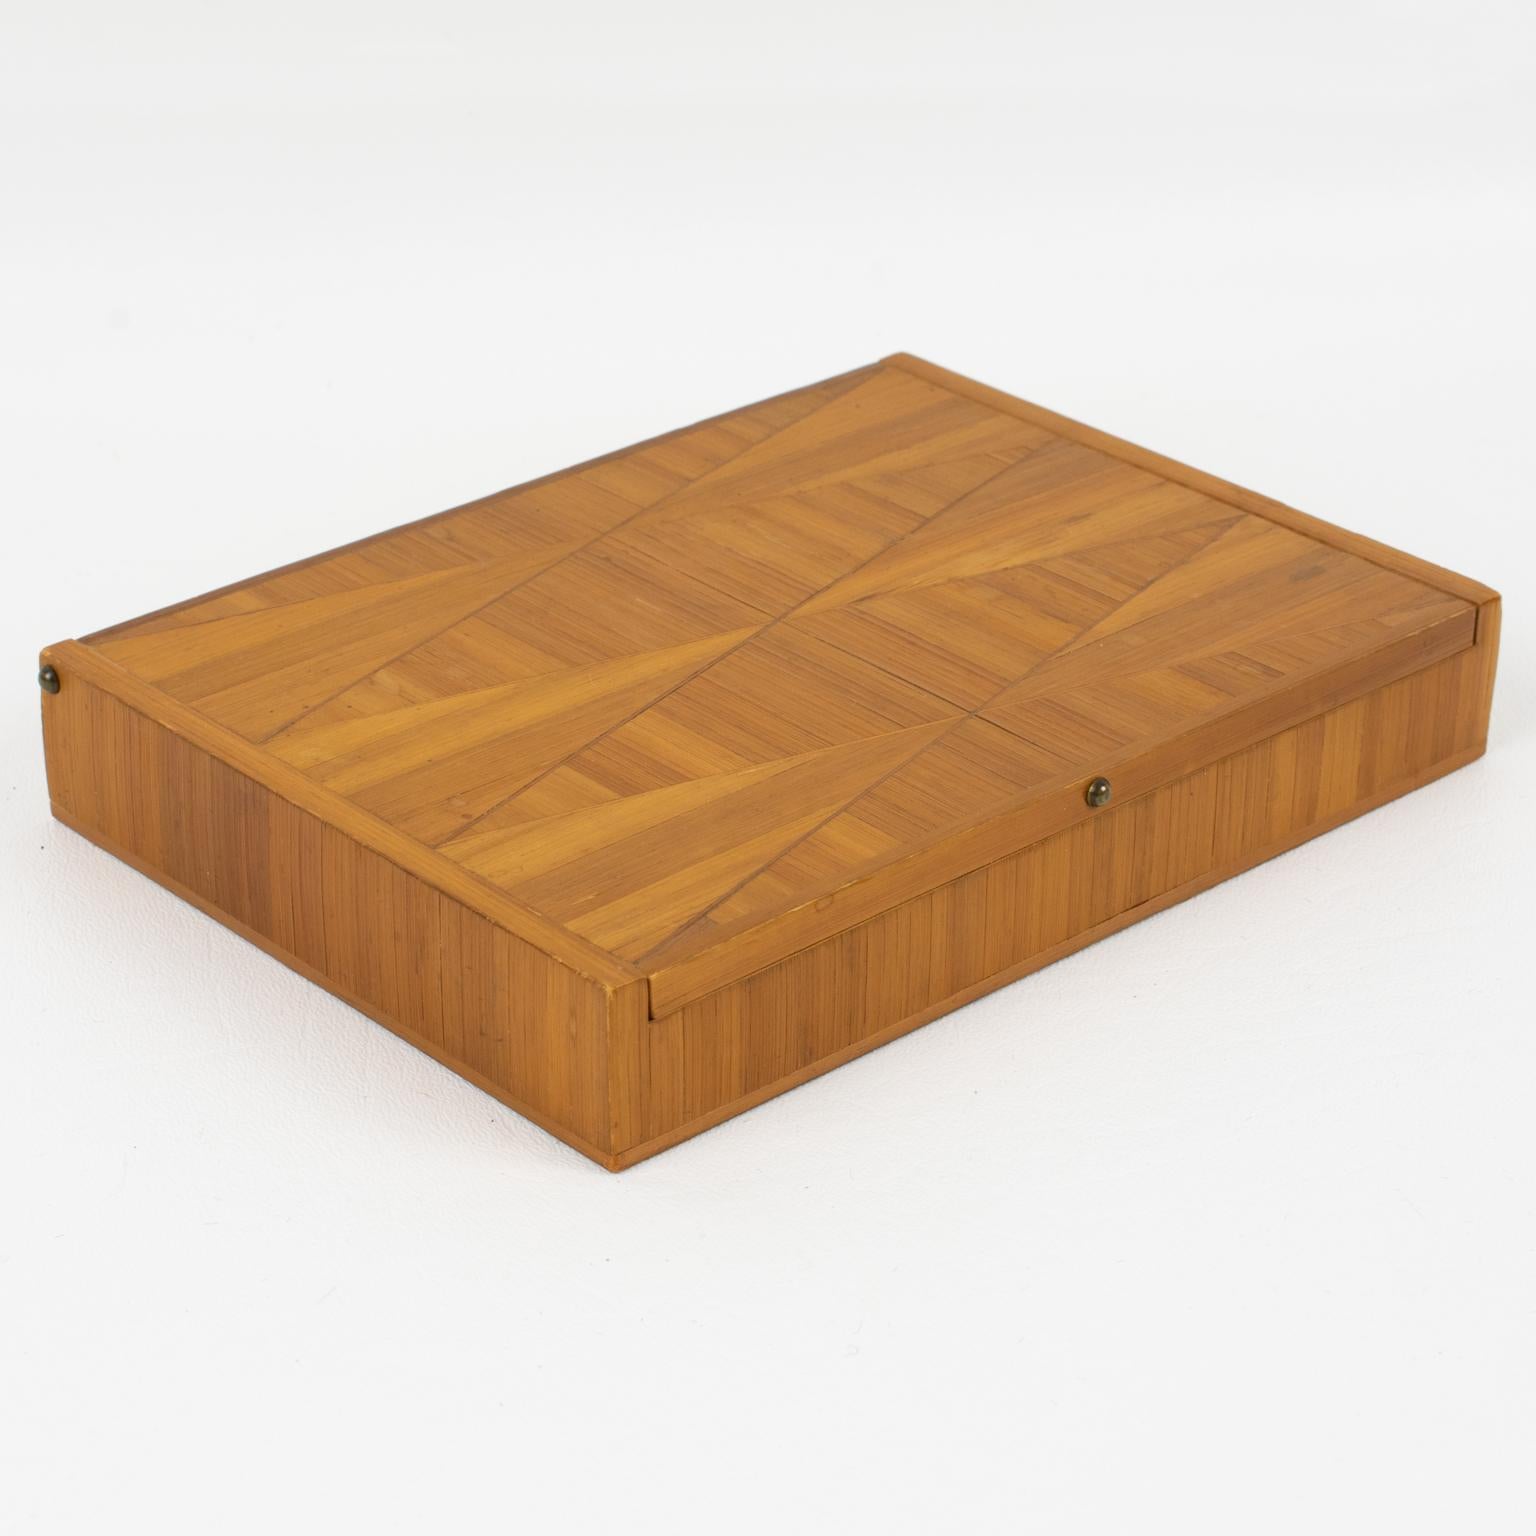 French Decorative Straw Marquetry Box, France 1930s attributed to Jean Michel Frank For Sale